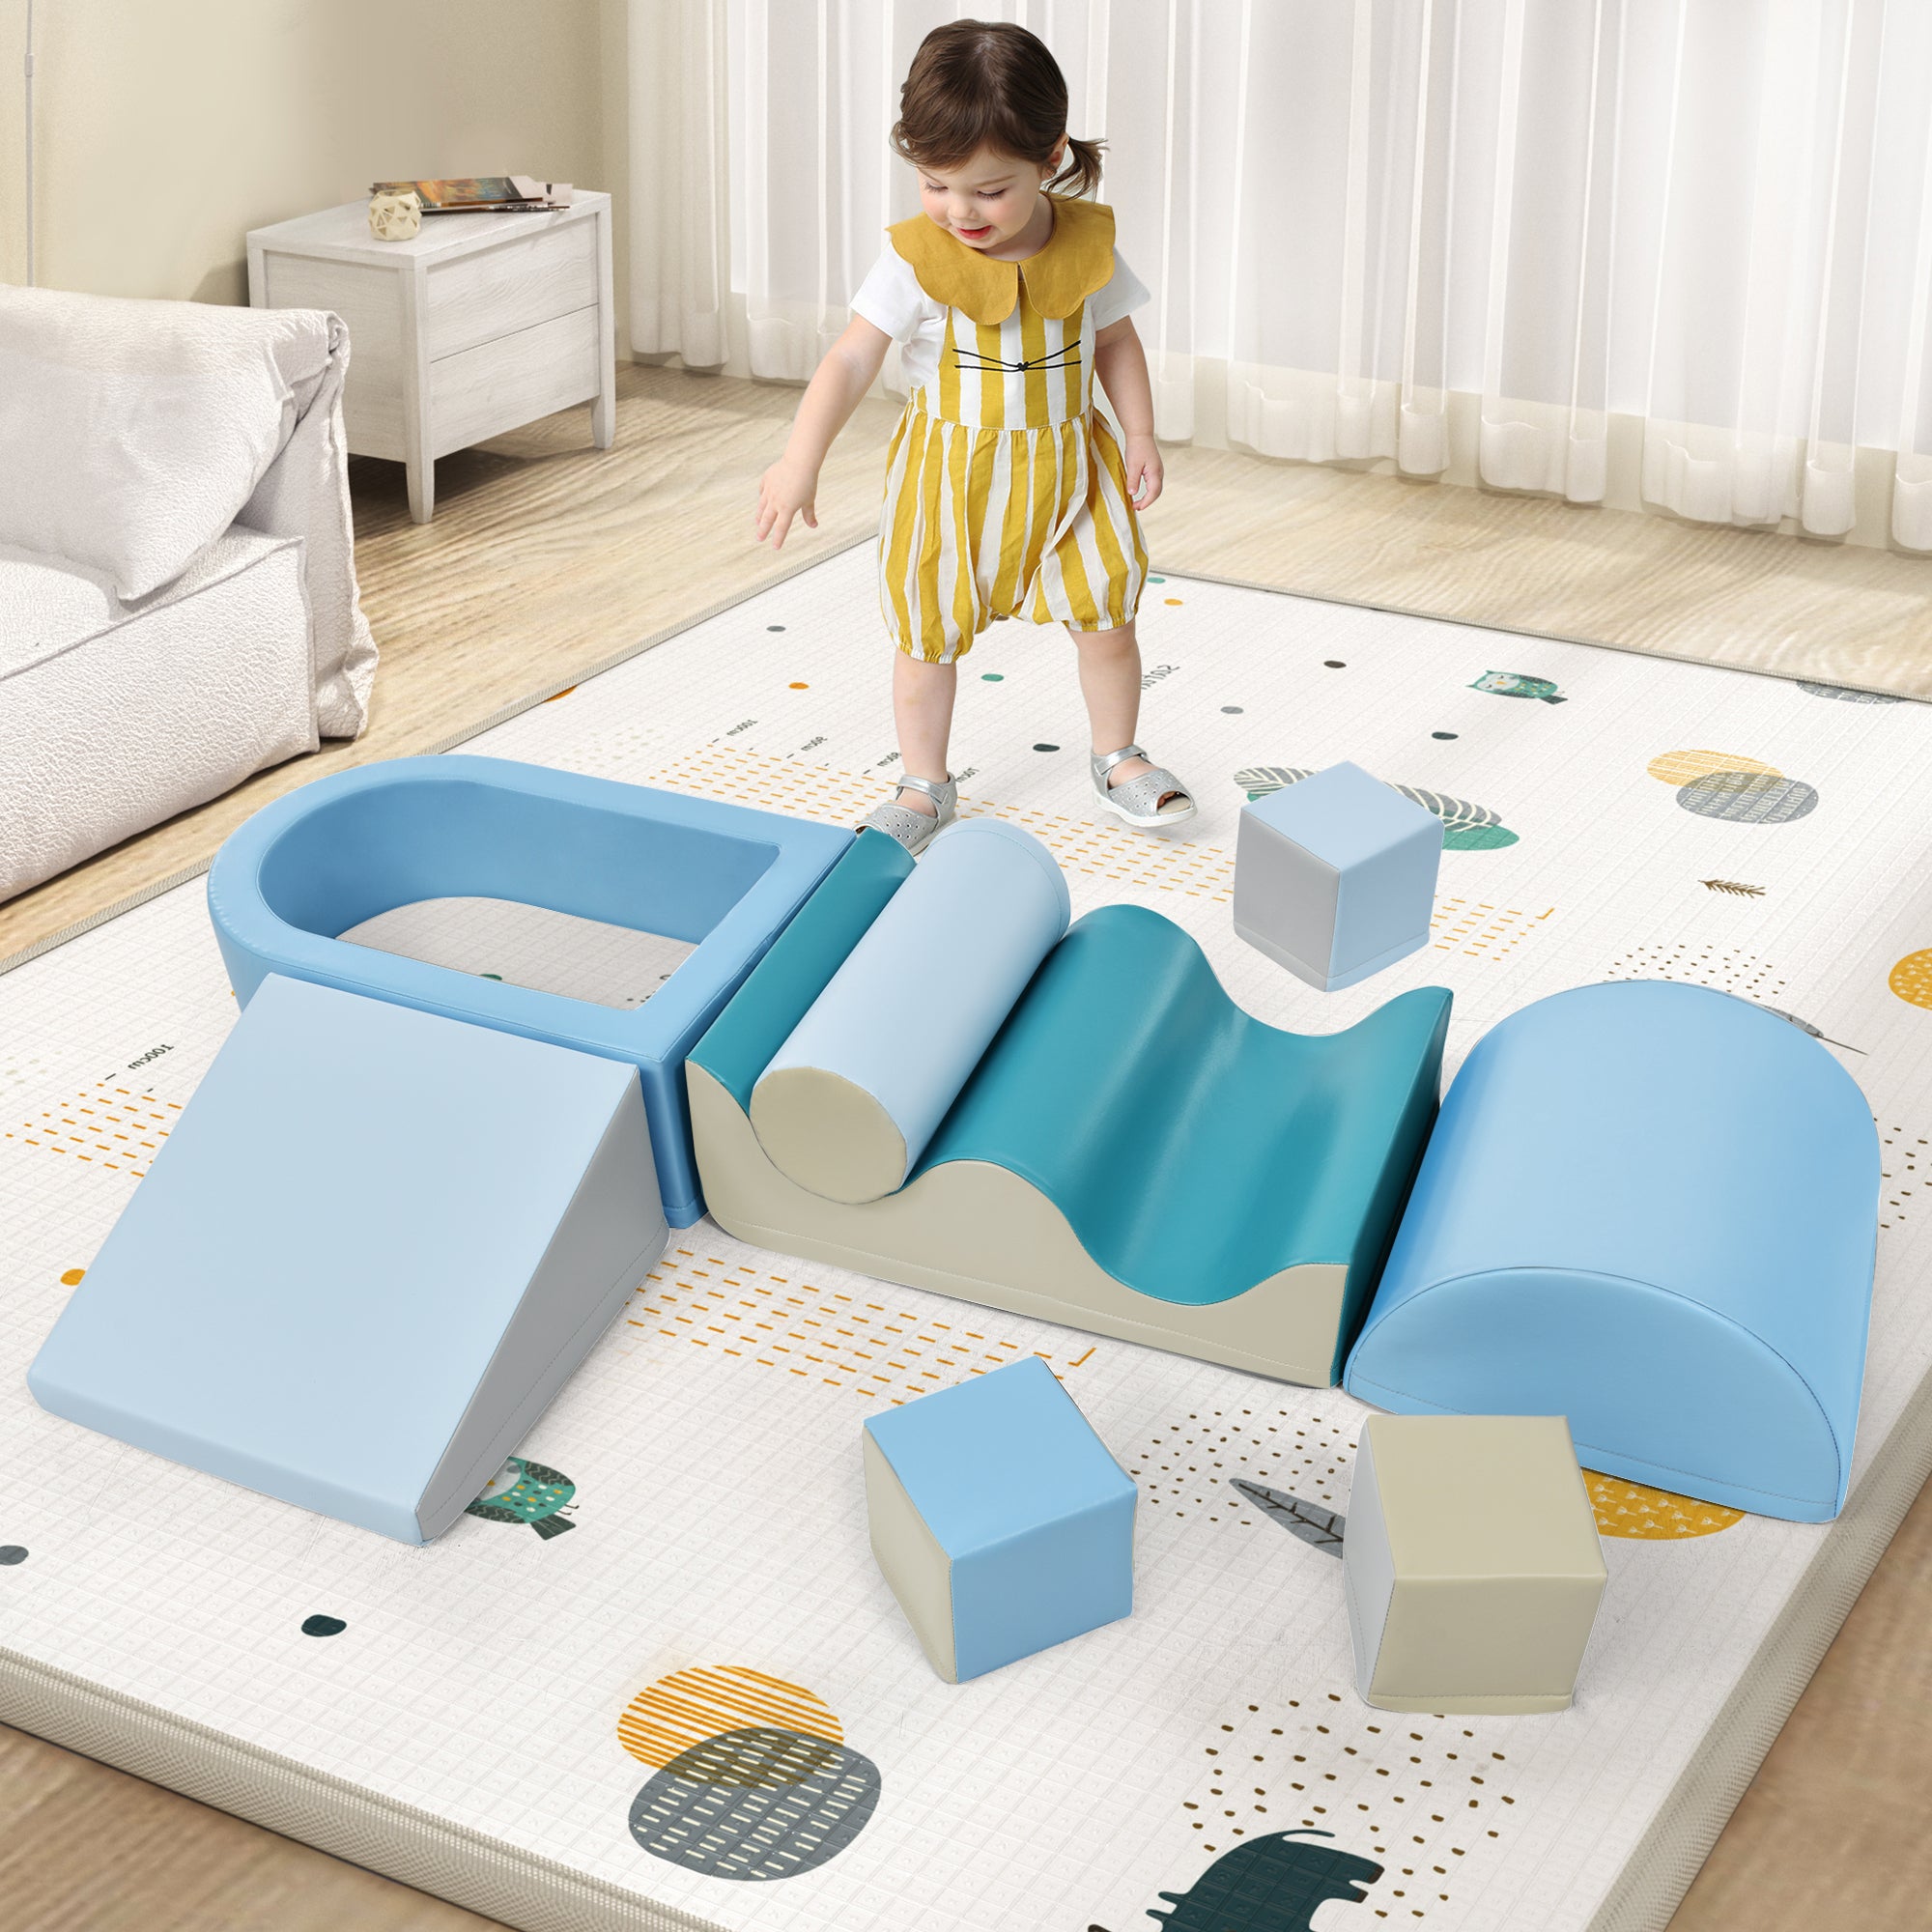 Soft Climb and Crawl Foam Playset 8 in 1 , Safe Soft Foam Nugget Block for Infants, Preschools, Toddlers, Kids Crawling and Climbing Indoor Active Play Structure